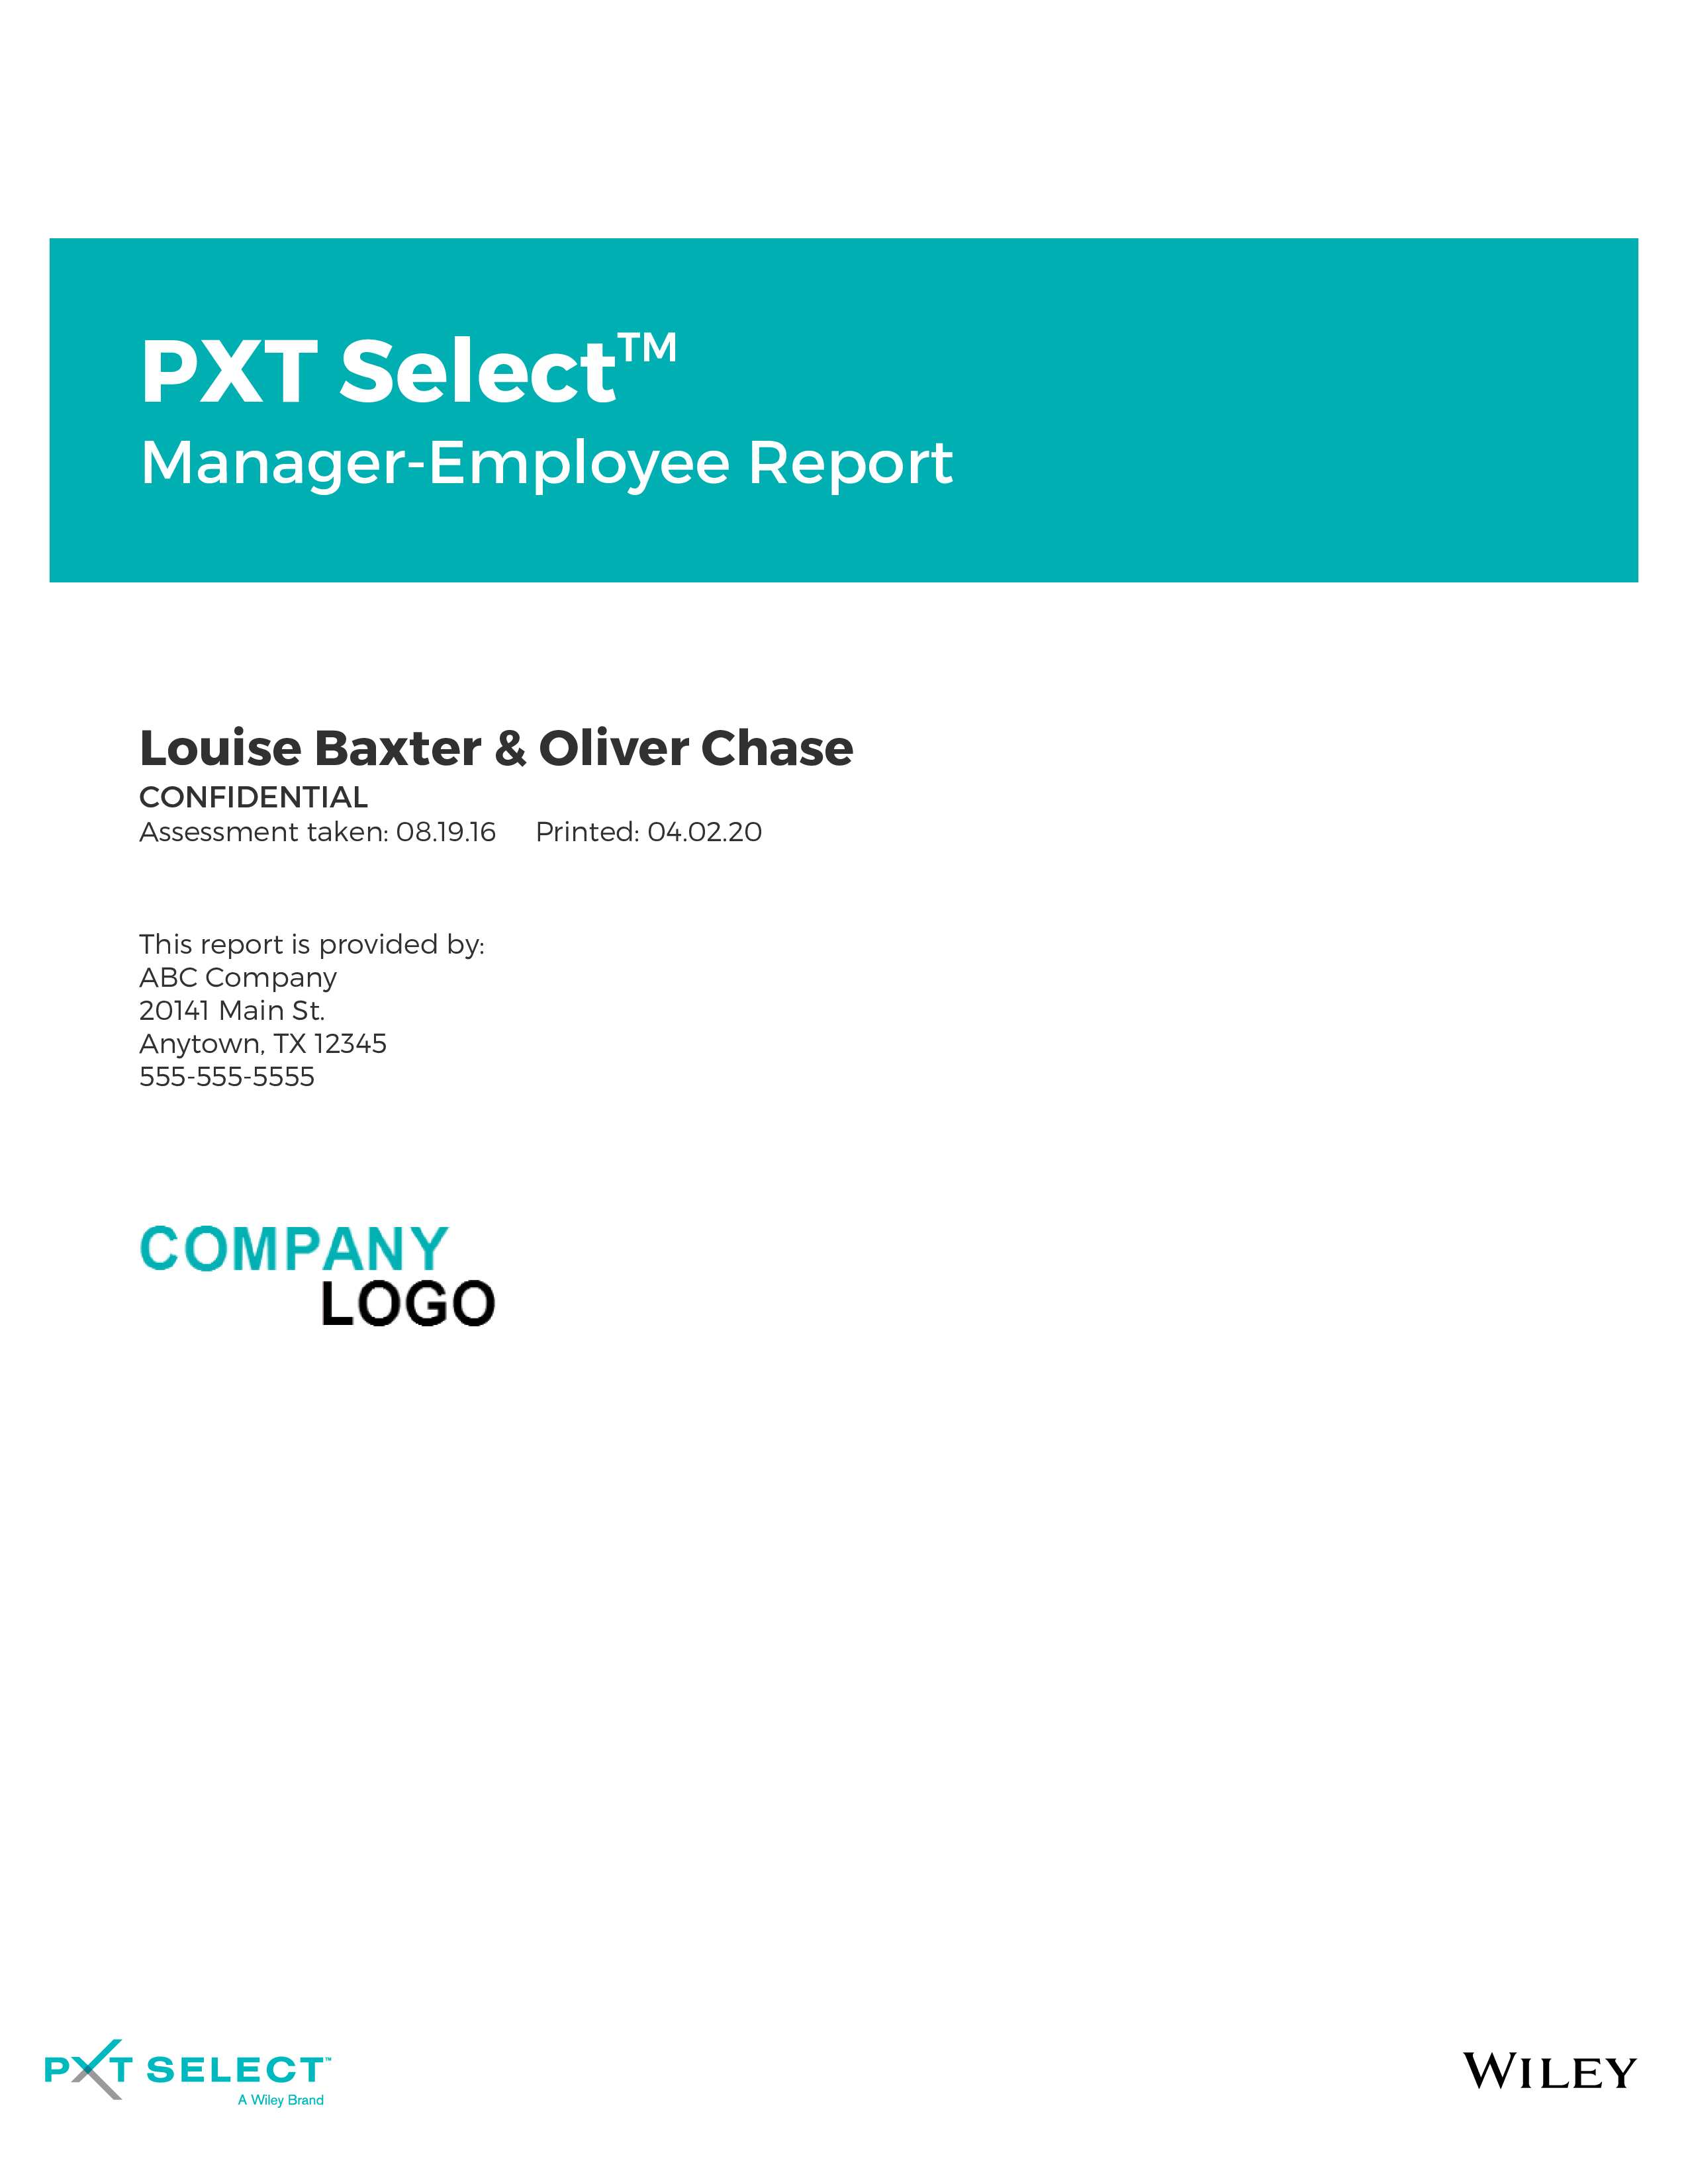 PXT Select Manager-Employee Report November 2021 Image